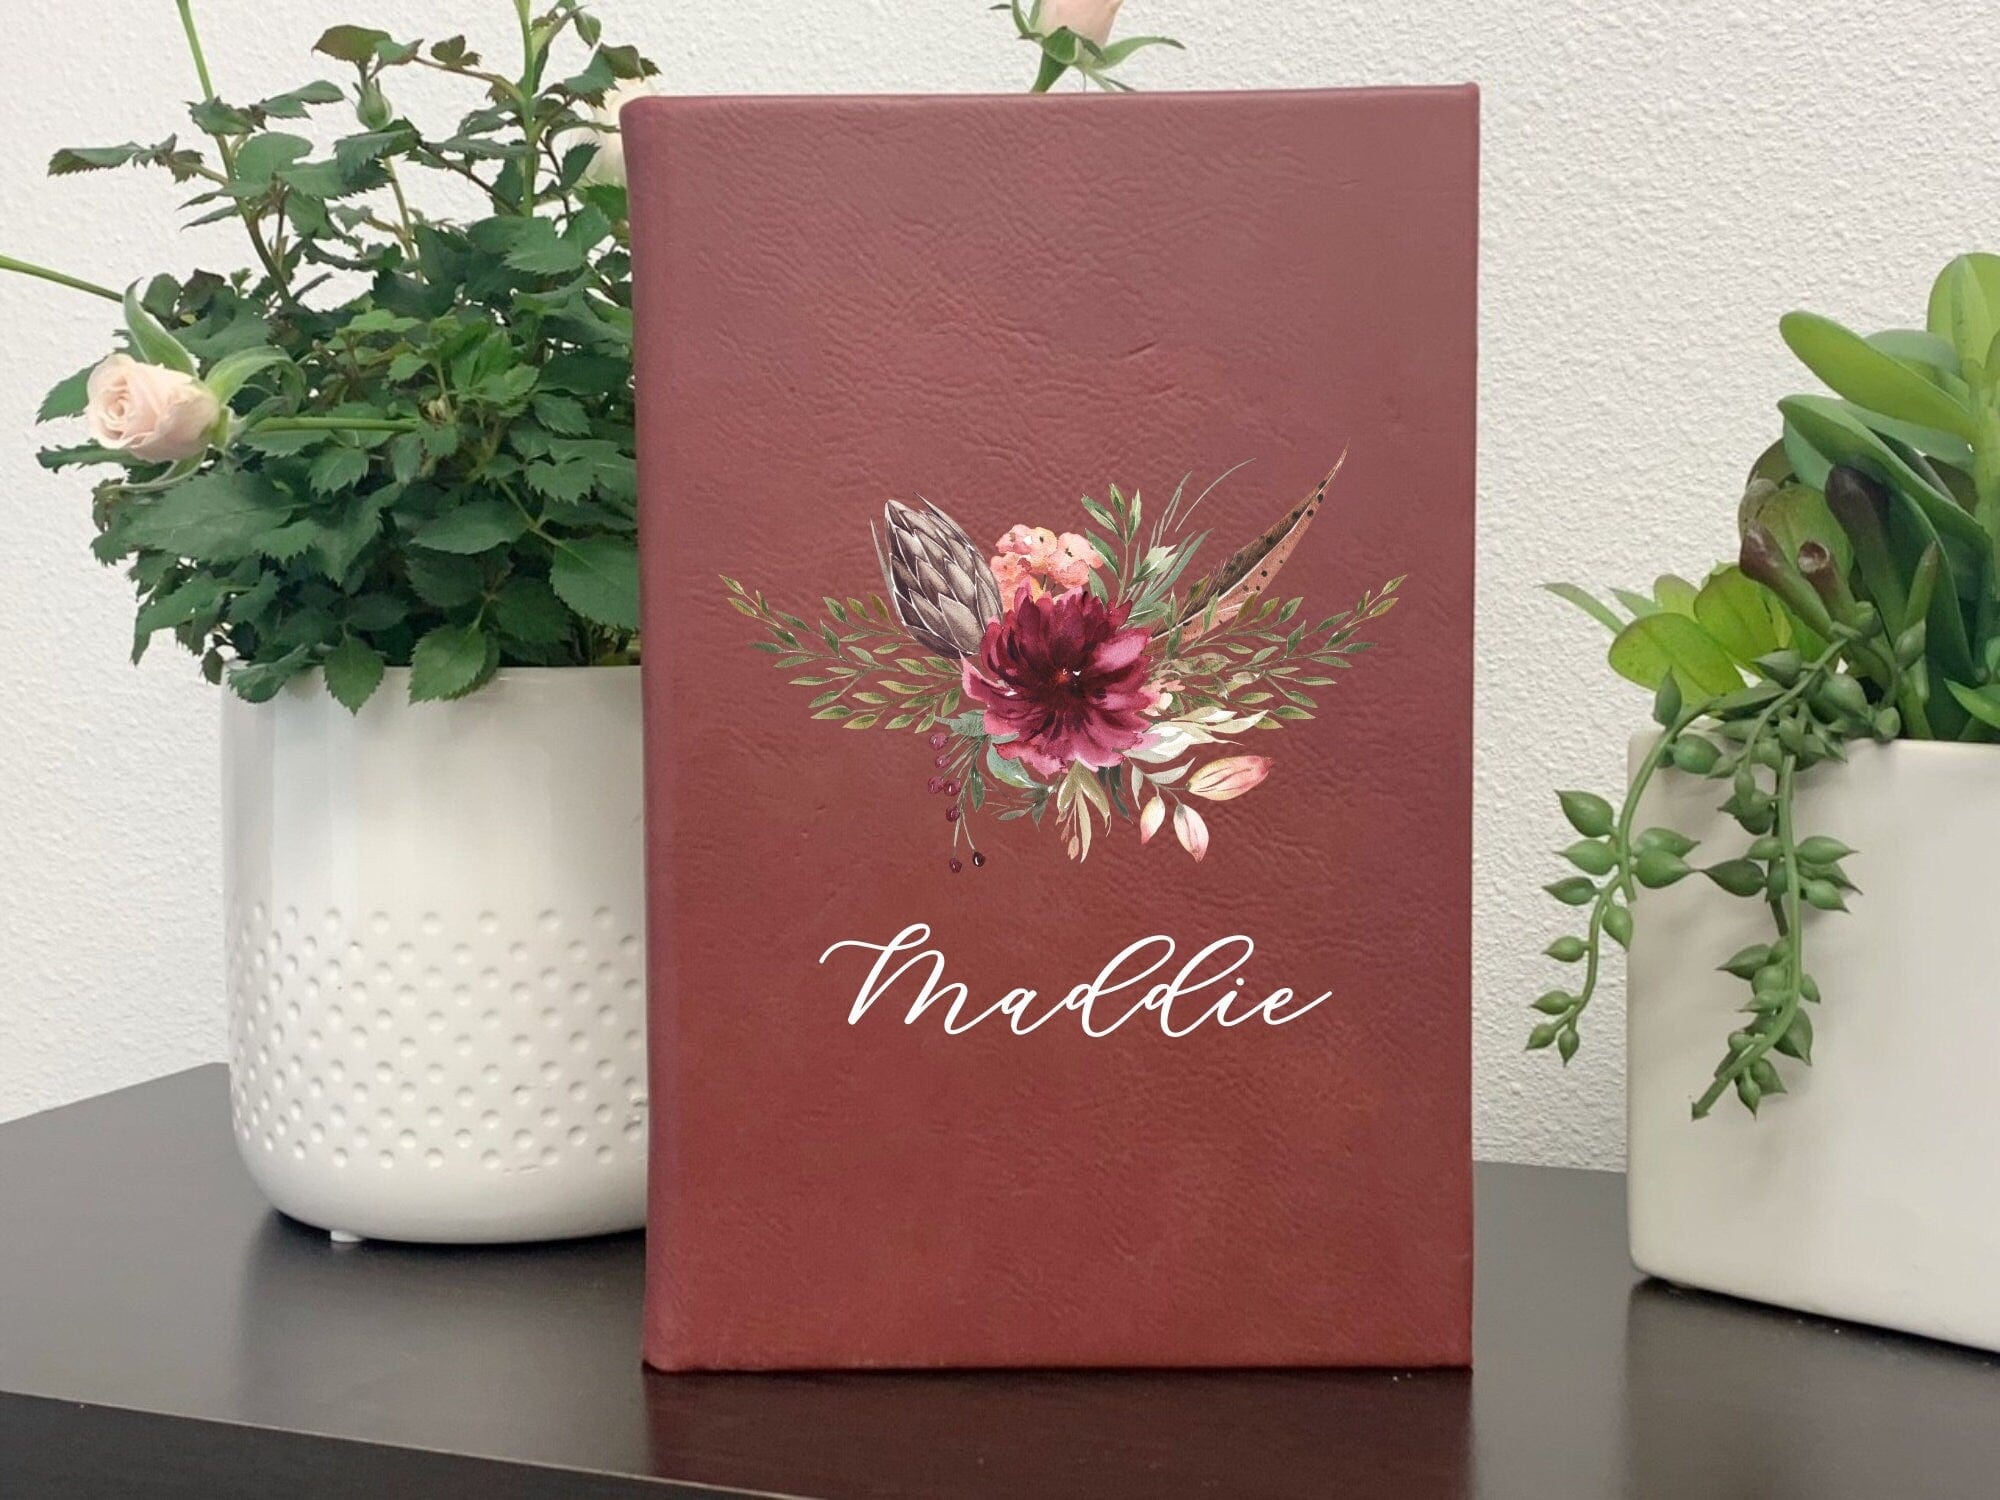 Leatherette journal Leatherette Journal Name Personalized Leatherette Journal With Flower Design